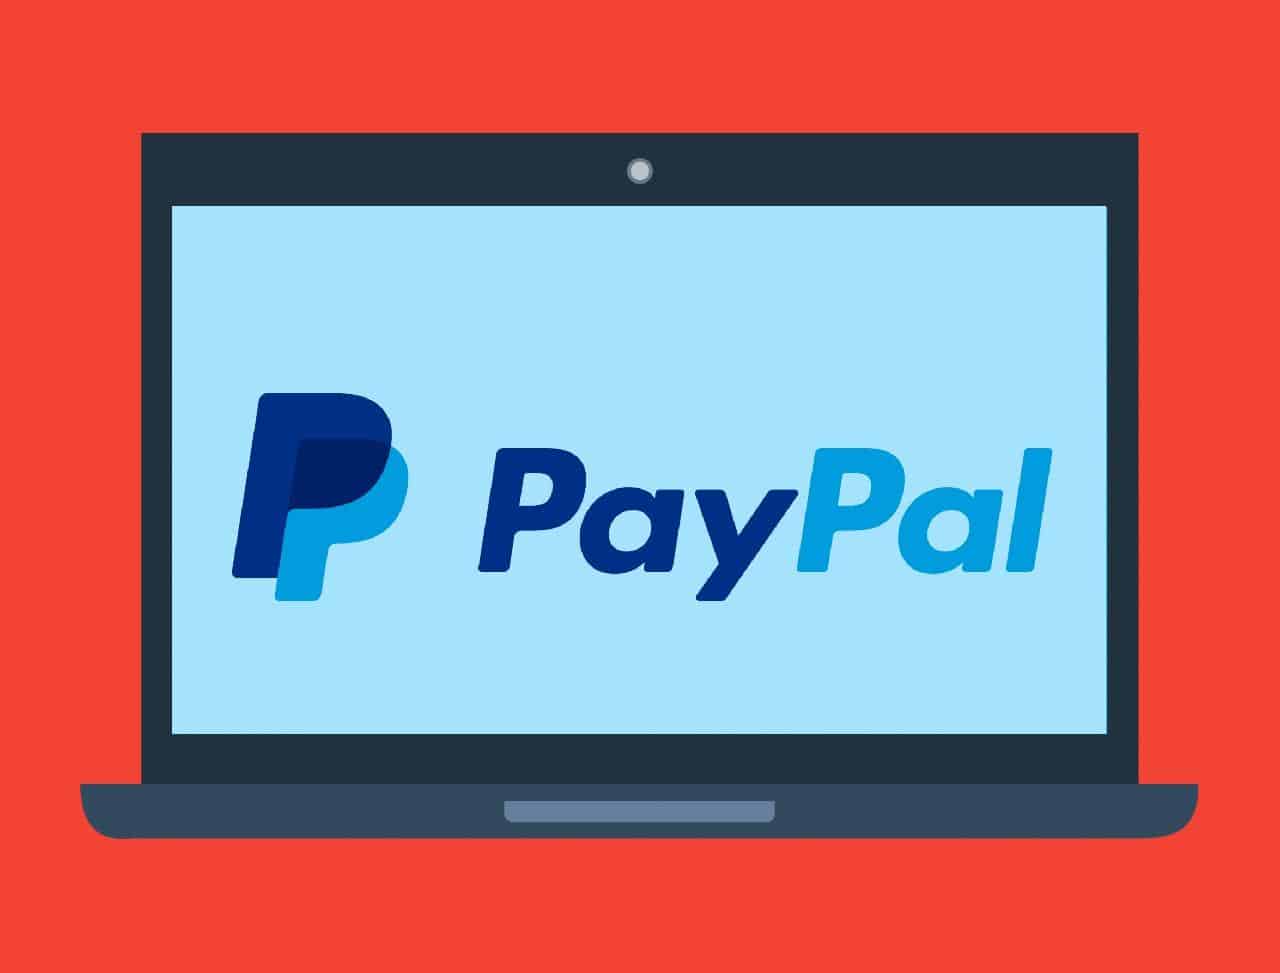 How to Use Ingo Money for Check Cashing in PayPal